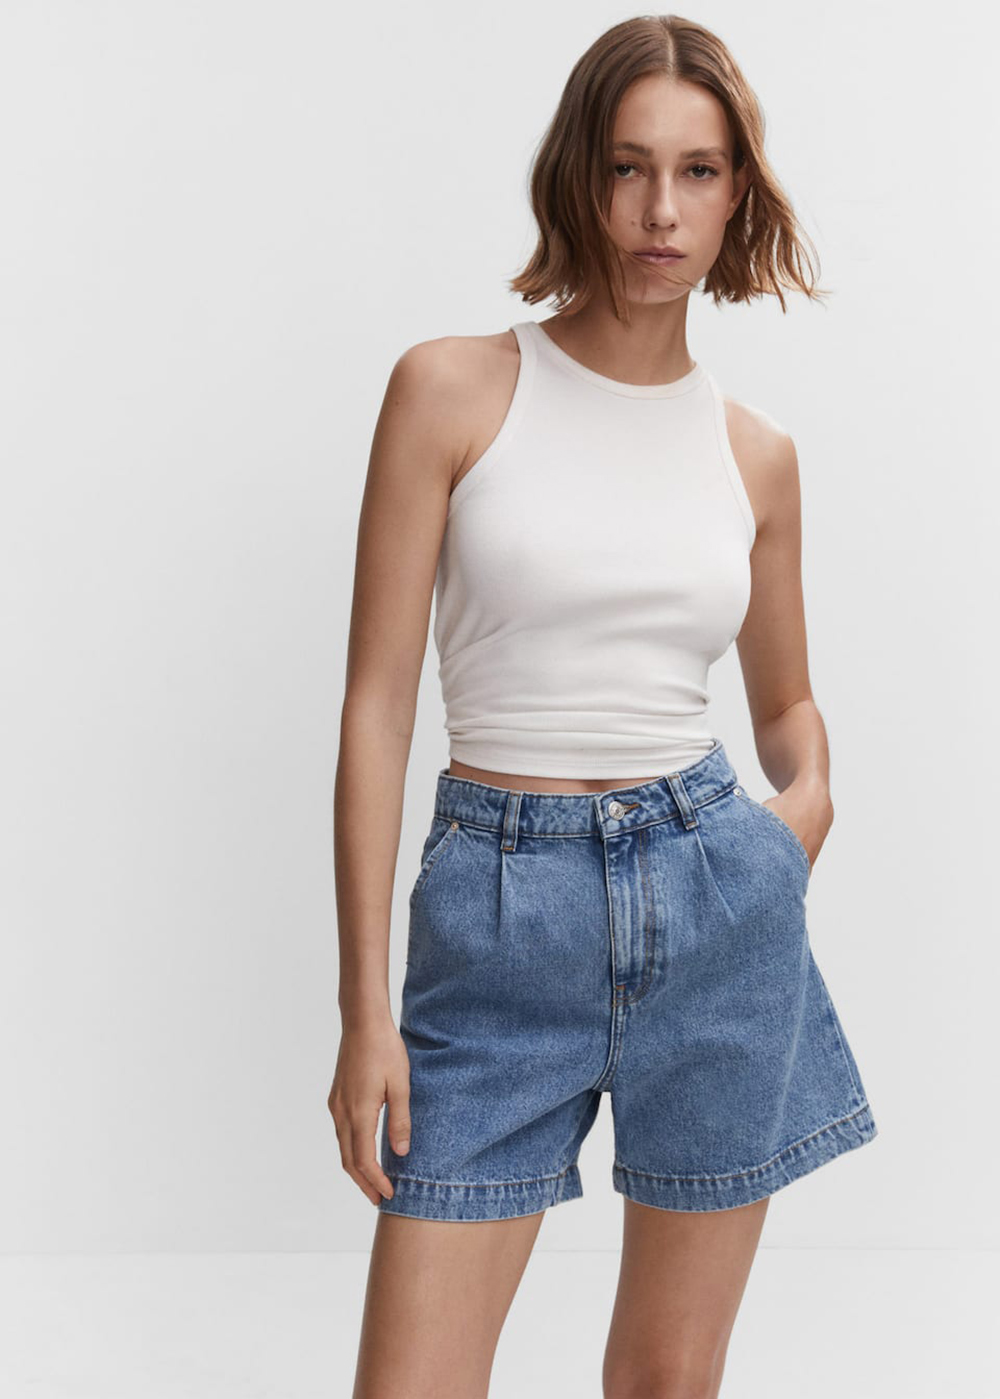 A model wearing tailored denim shorts from Mango.